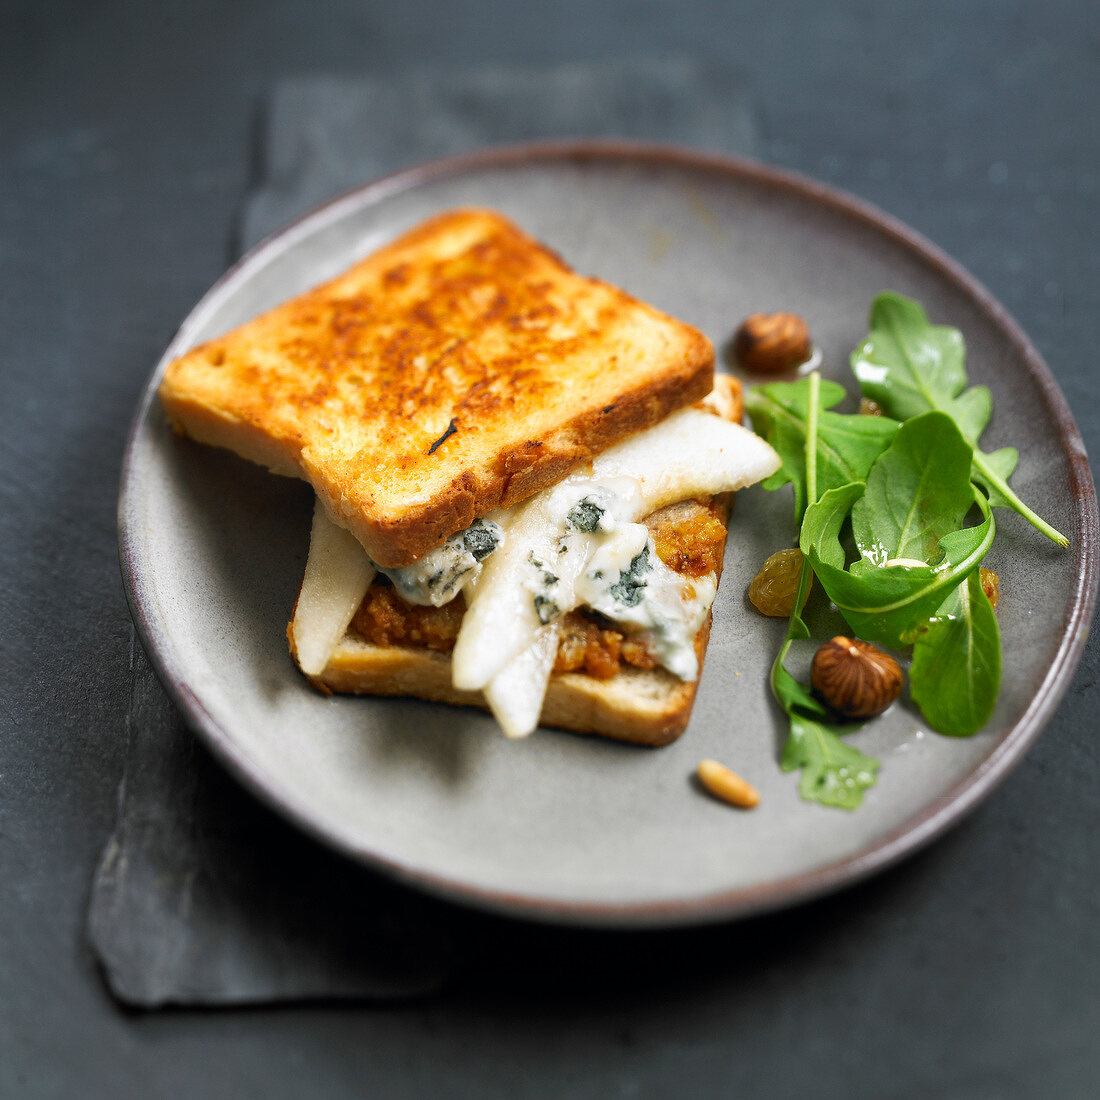 Pear and gorgonzola toasted sandwich